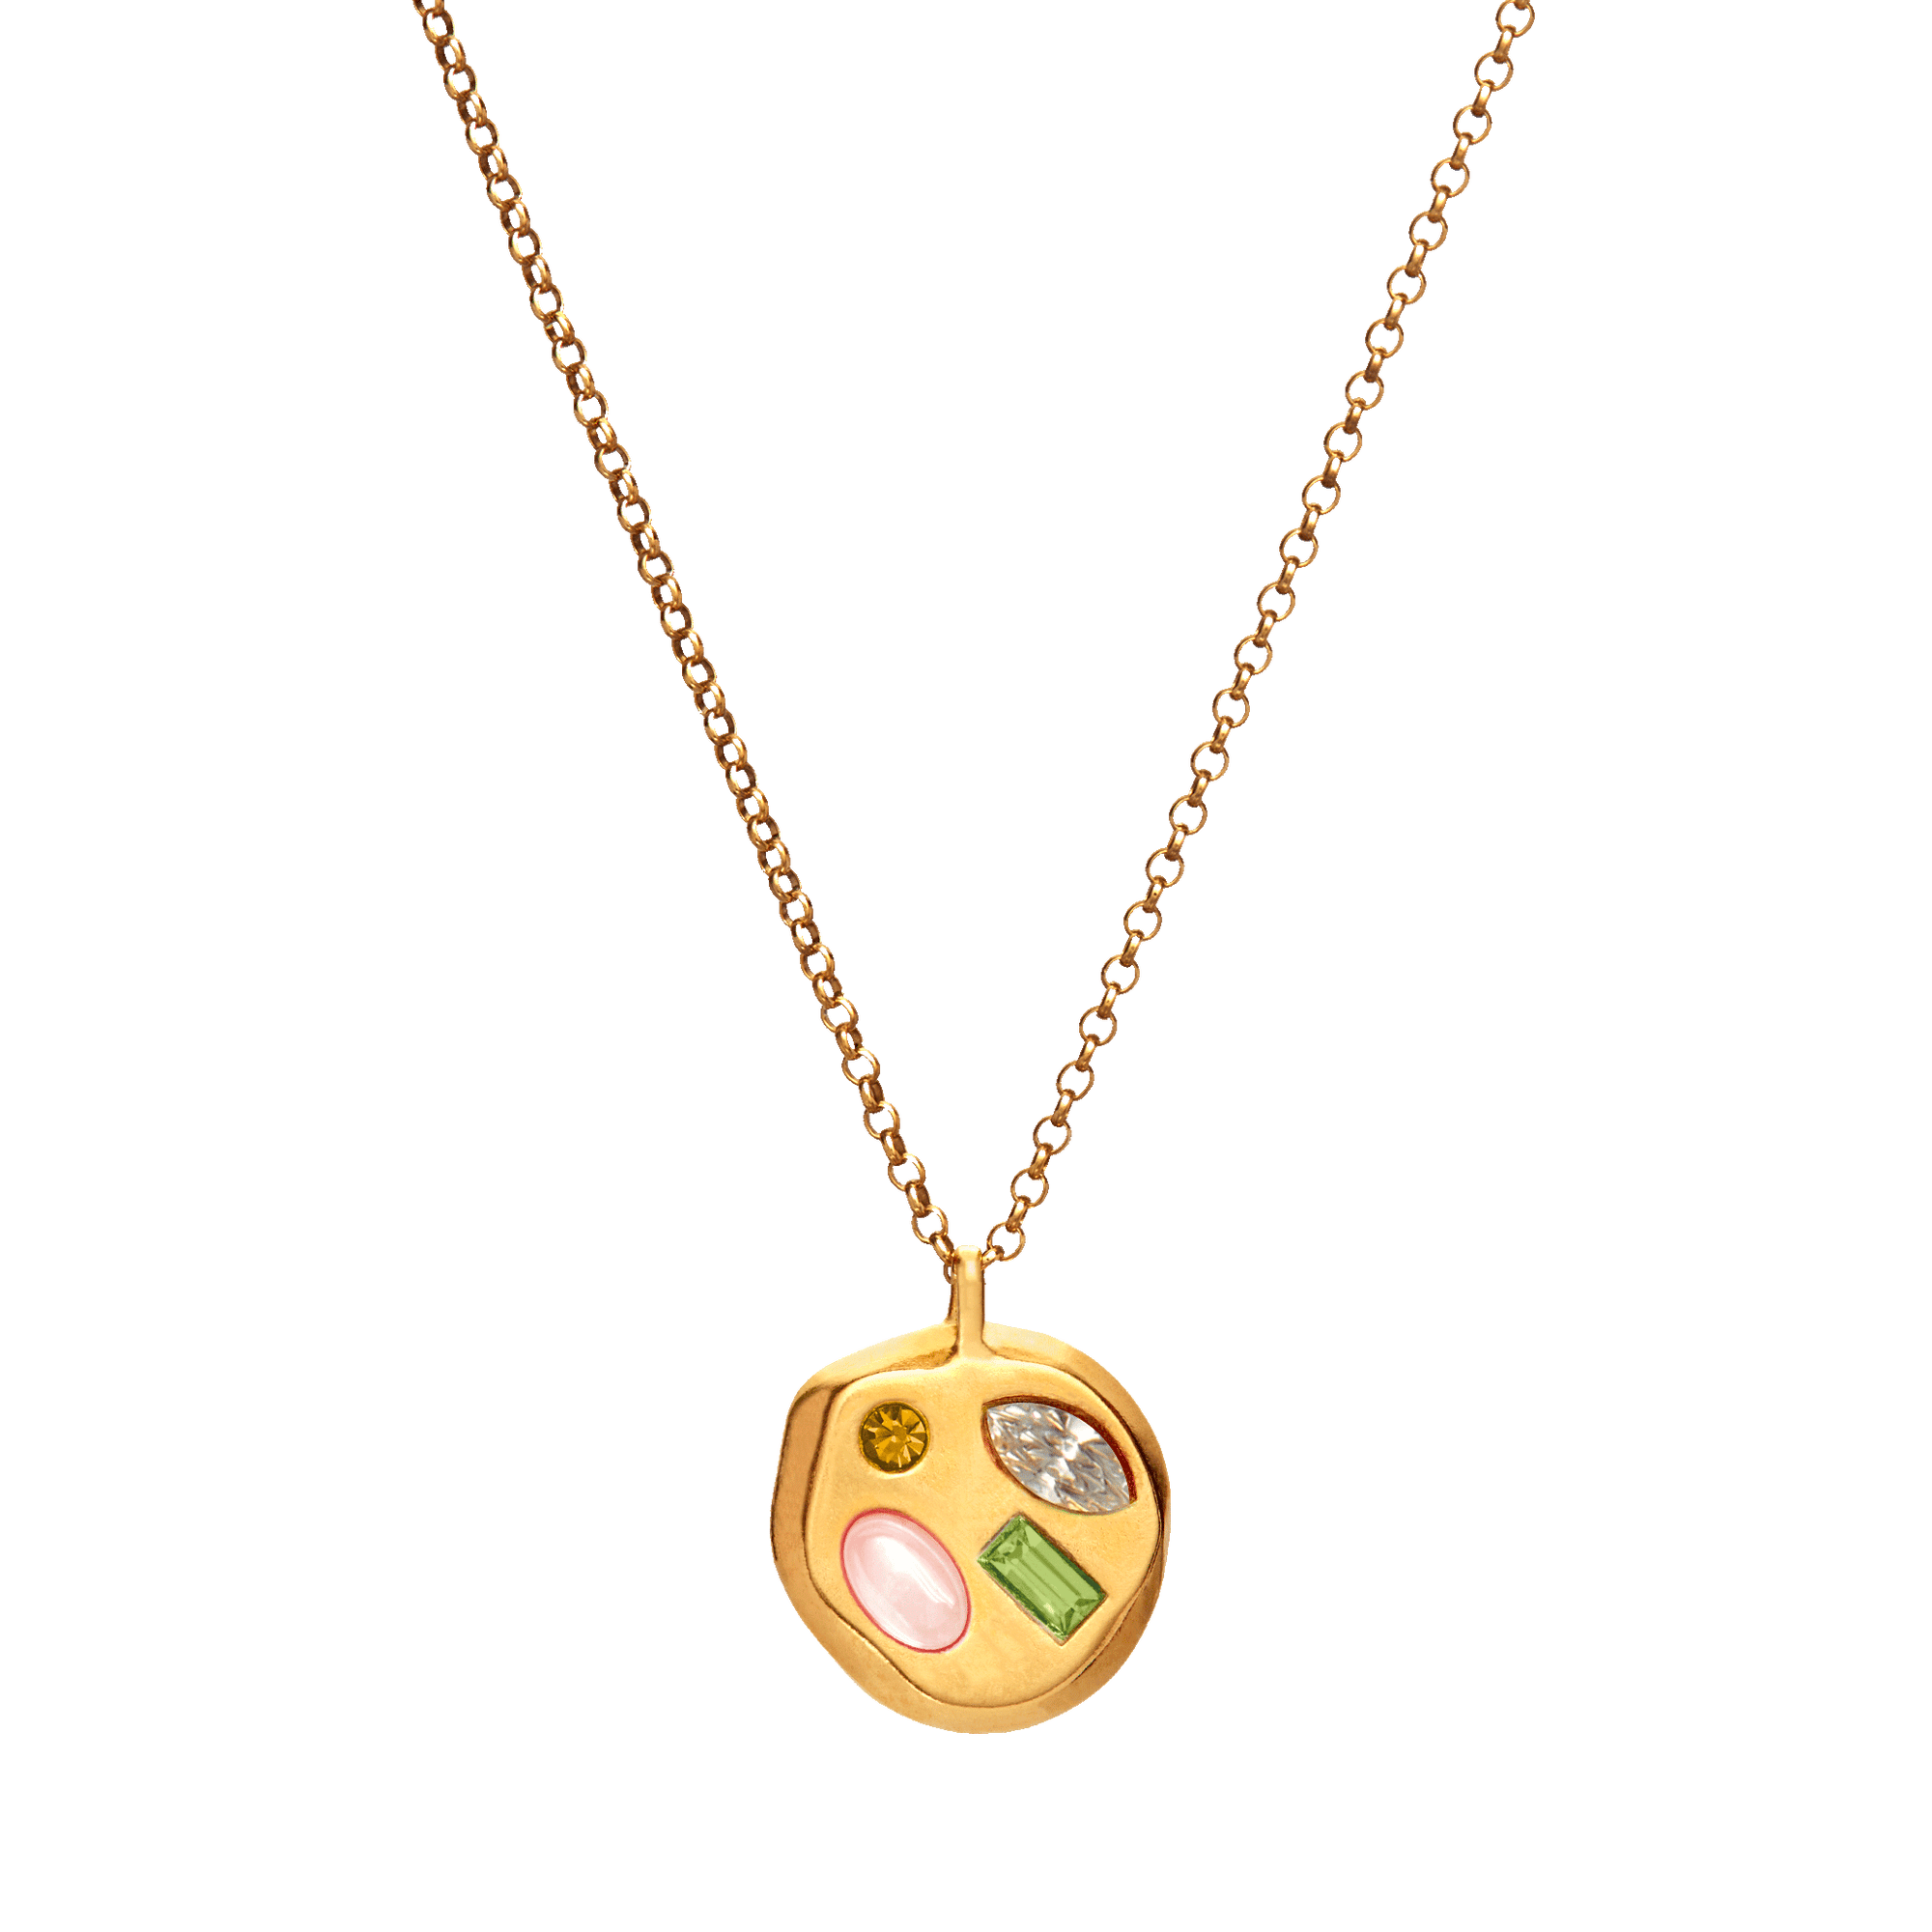 The April Eighth Pendant